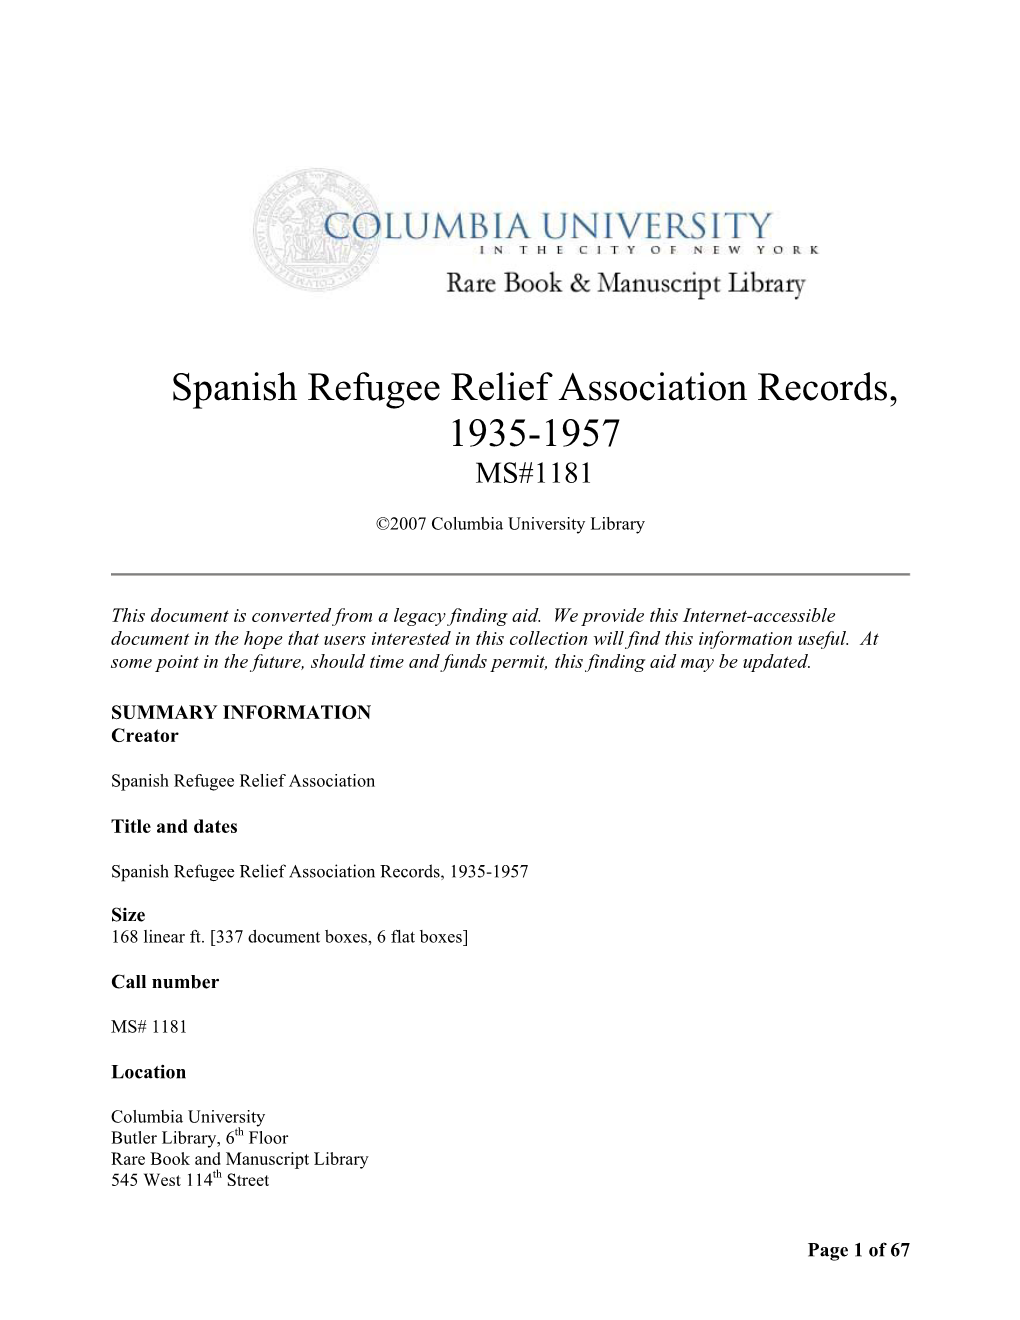 Spanish Refugee Relief Association Records, 1935-1957 MS#1181